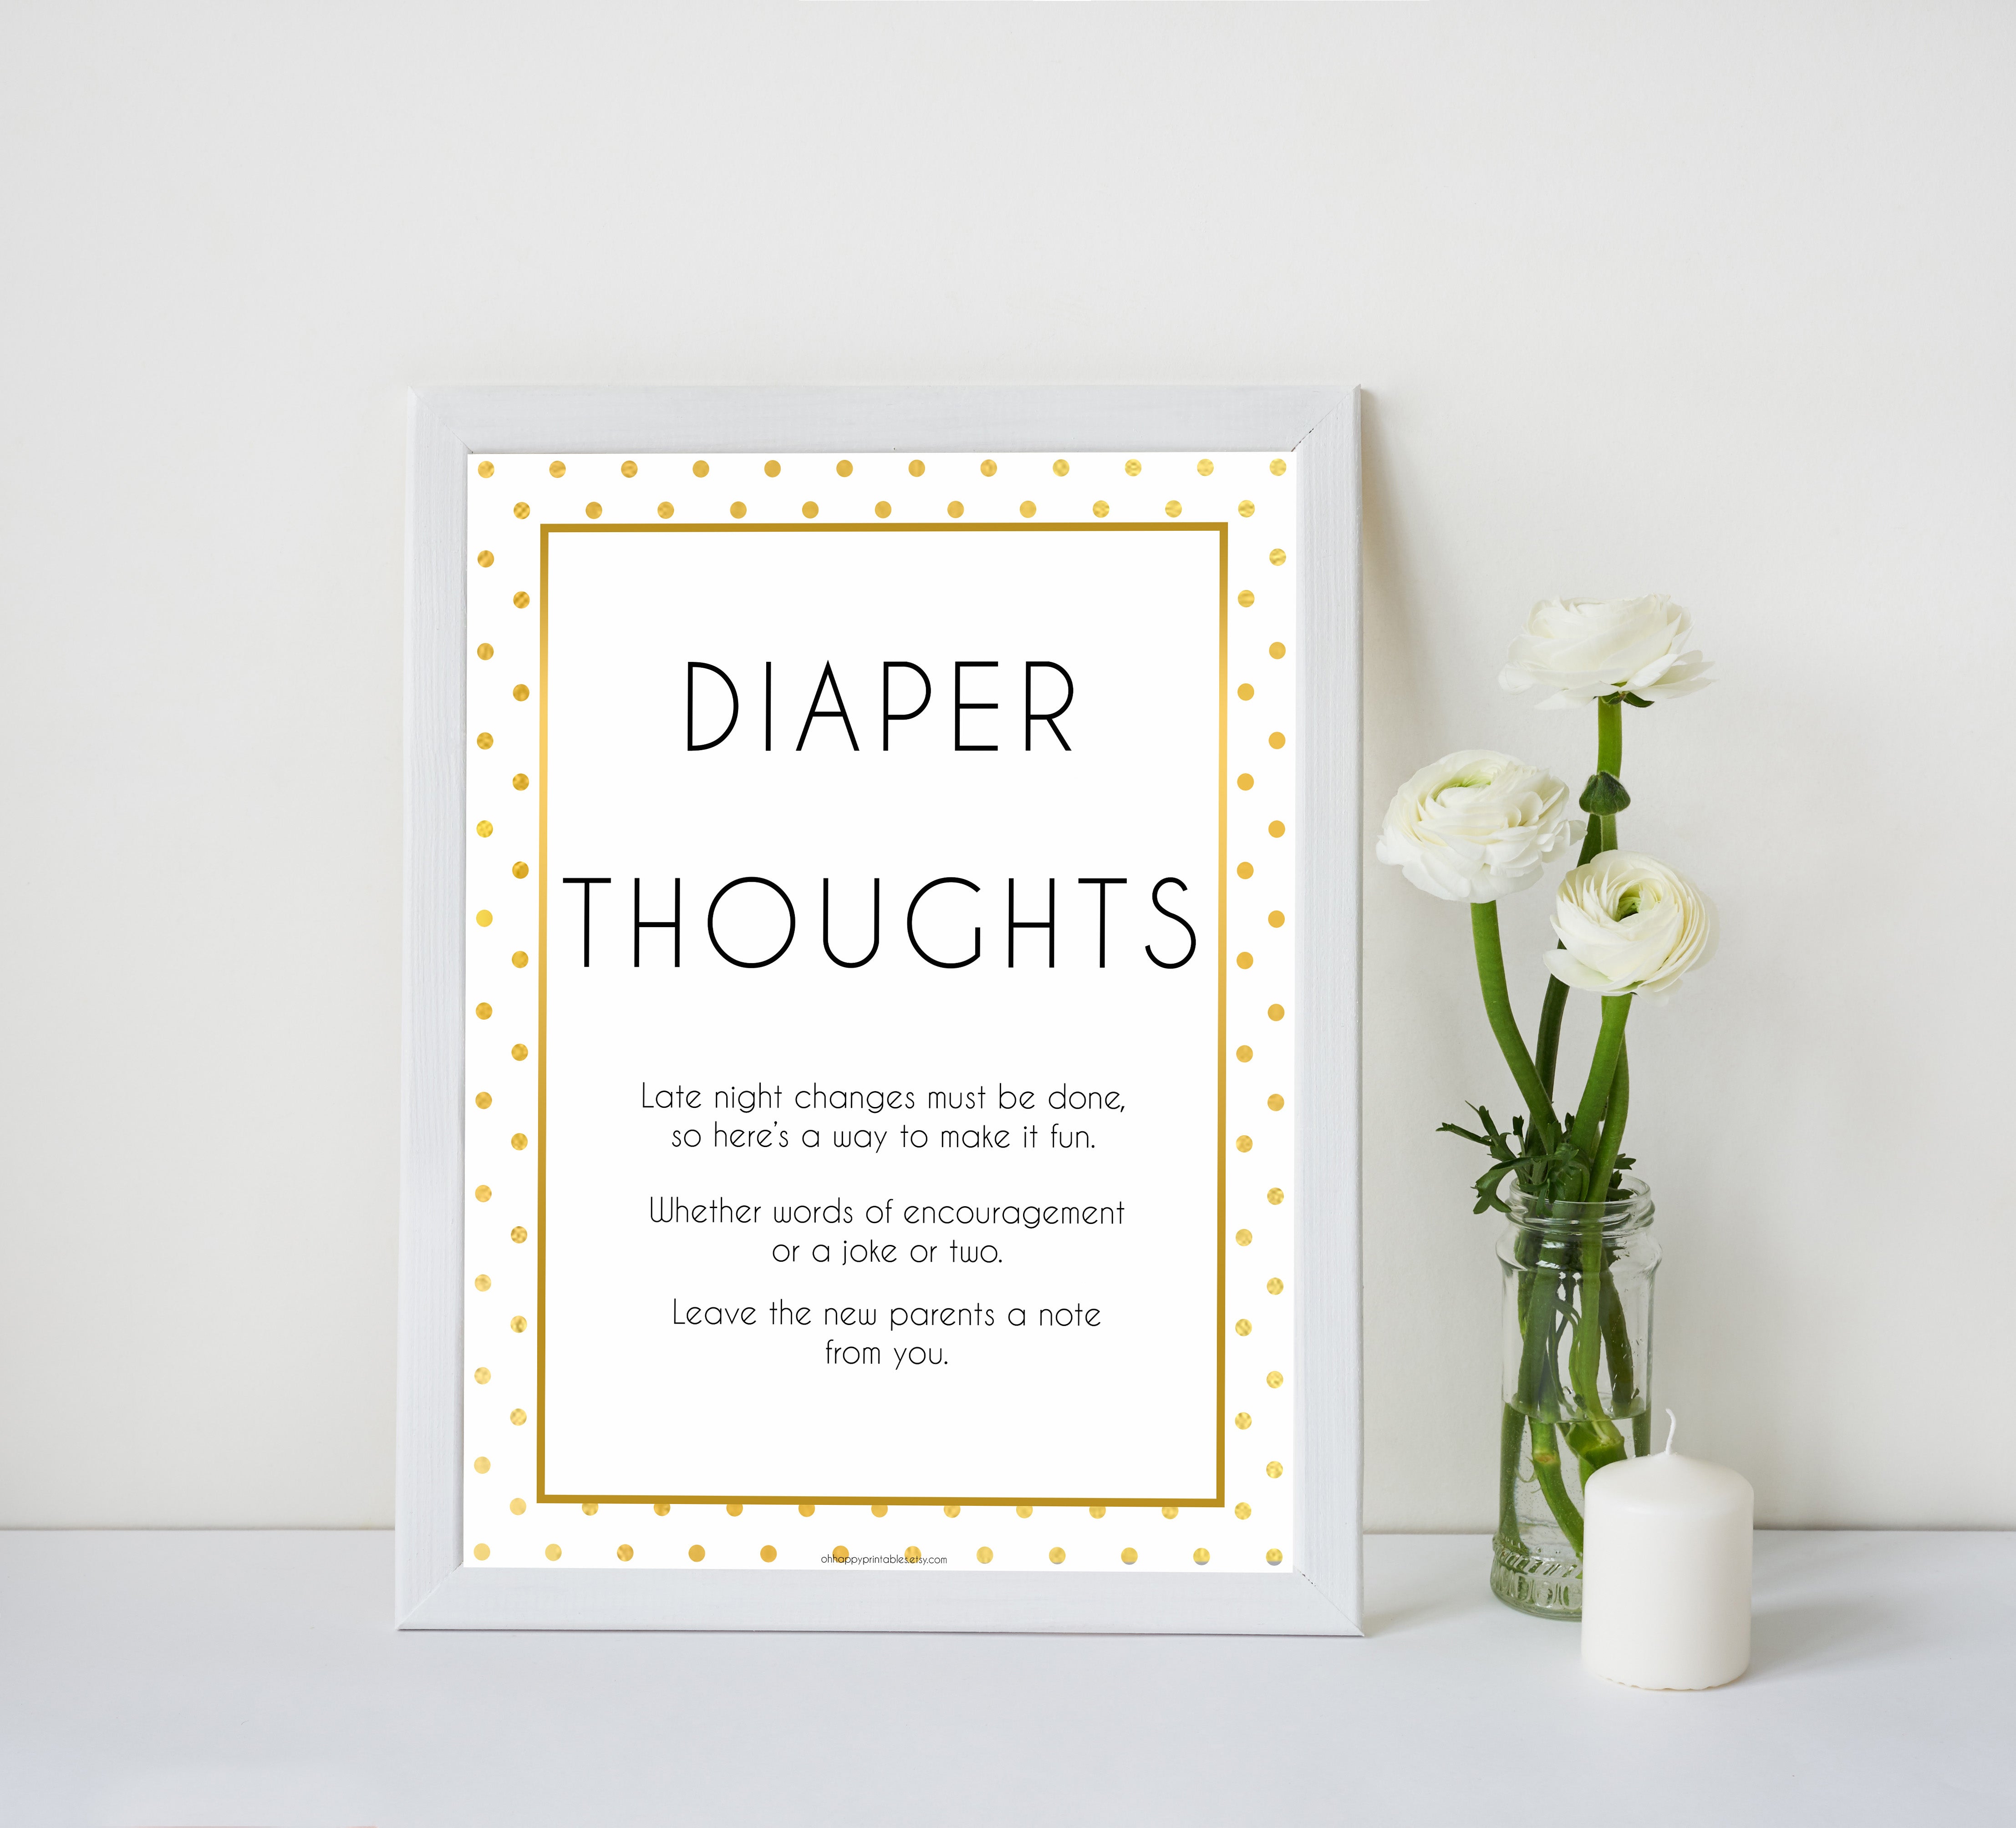 Diaper thoughts, late night diapers, Printable baby shower games, baby gold dots fun baby games, baby shower games, fun baby shower ideas, top baby shower ideas, gold glitter shower baby shower, friends baby shower ideas